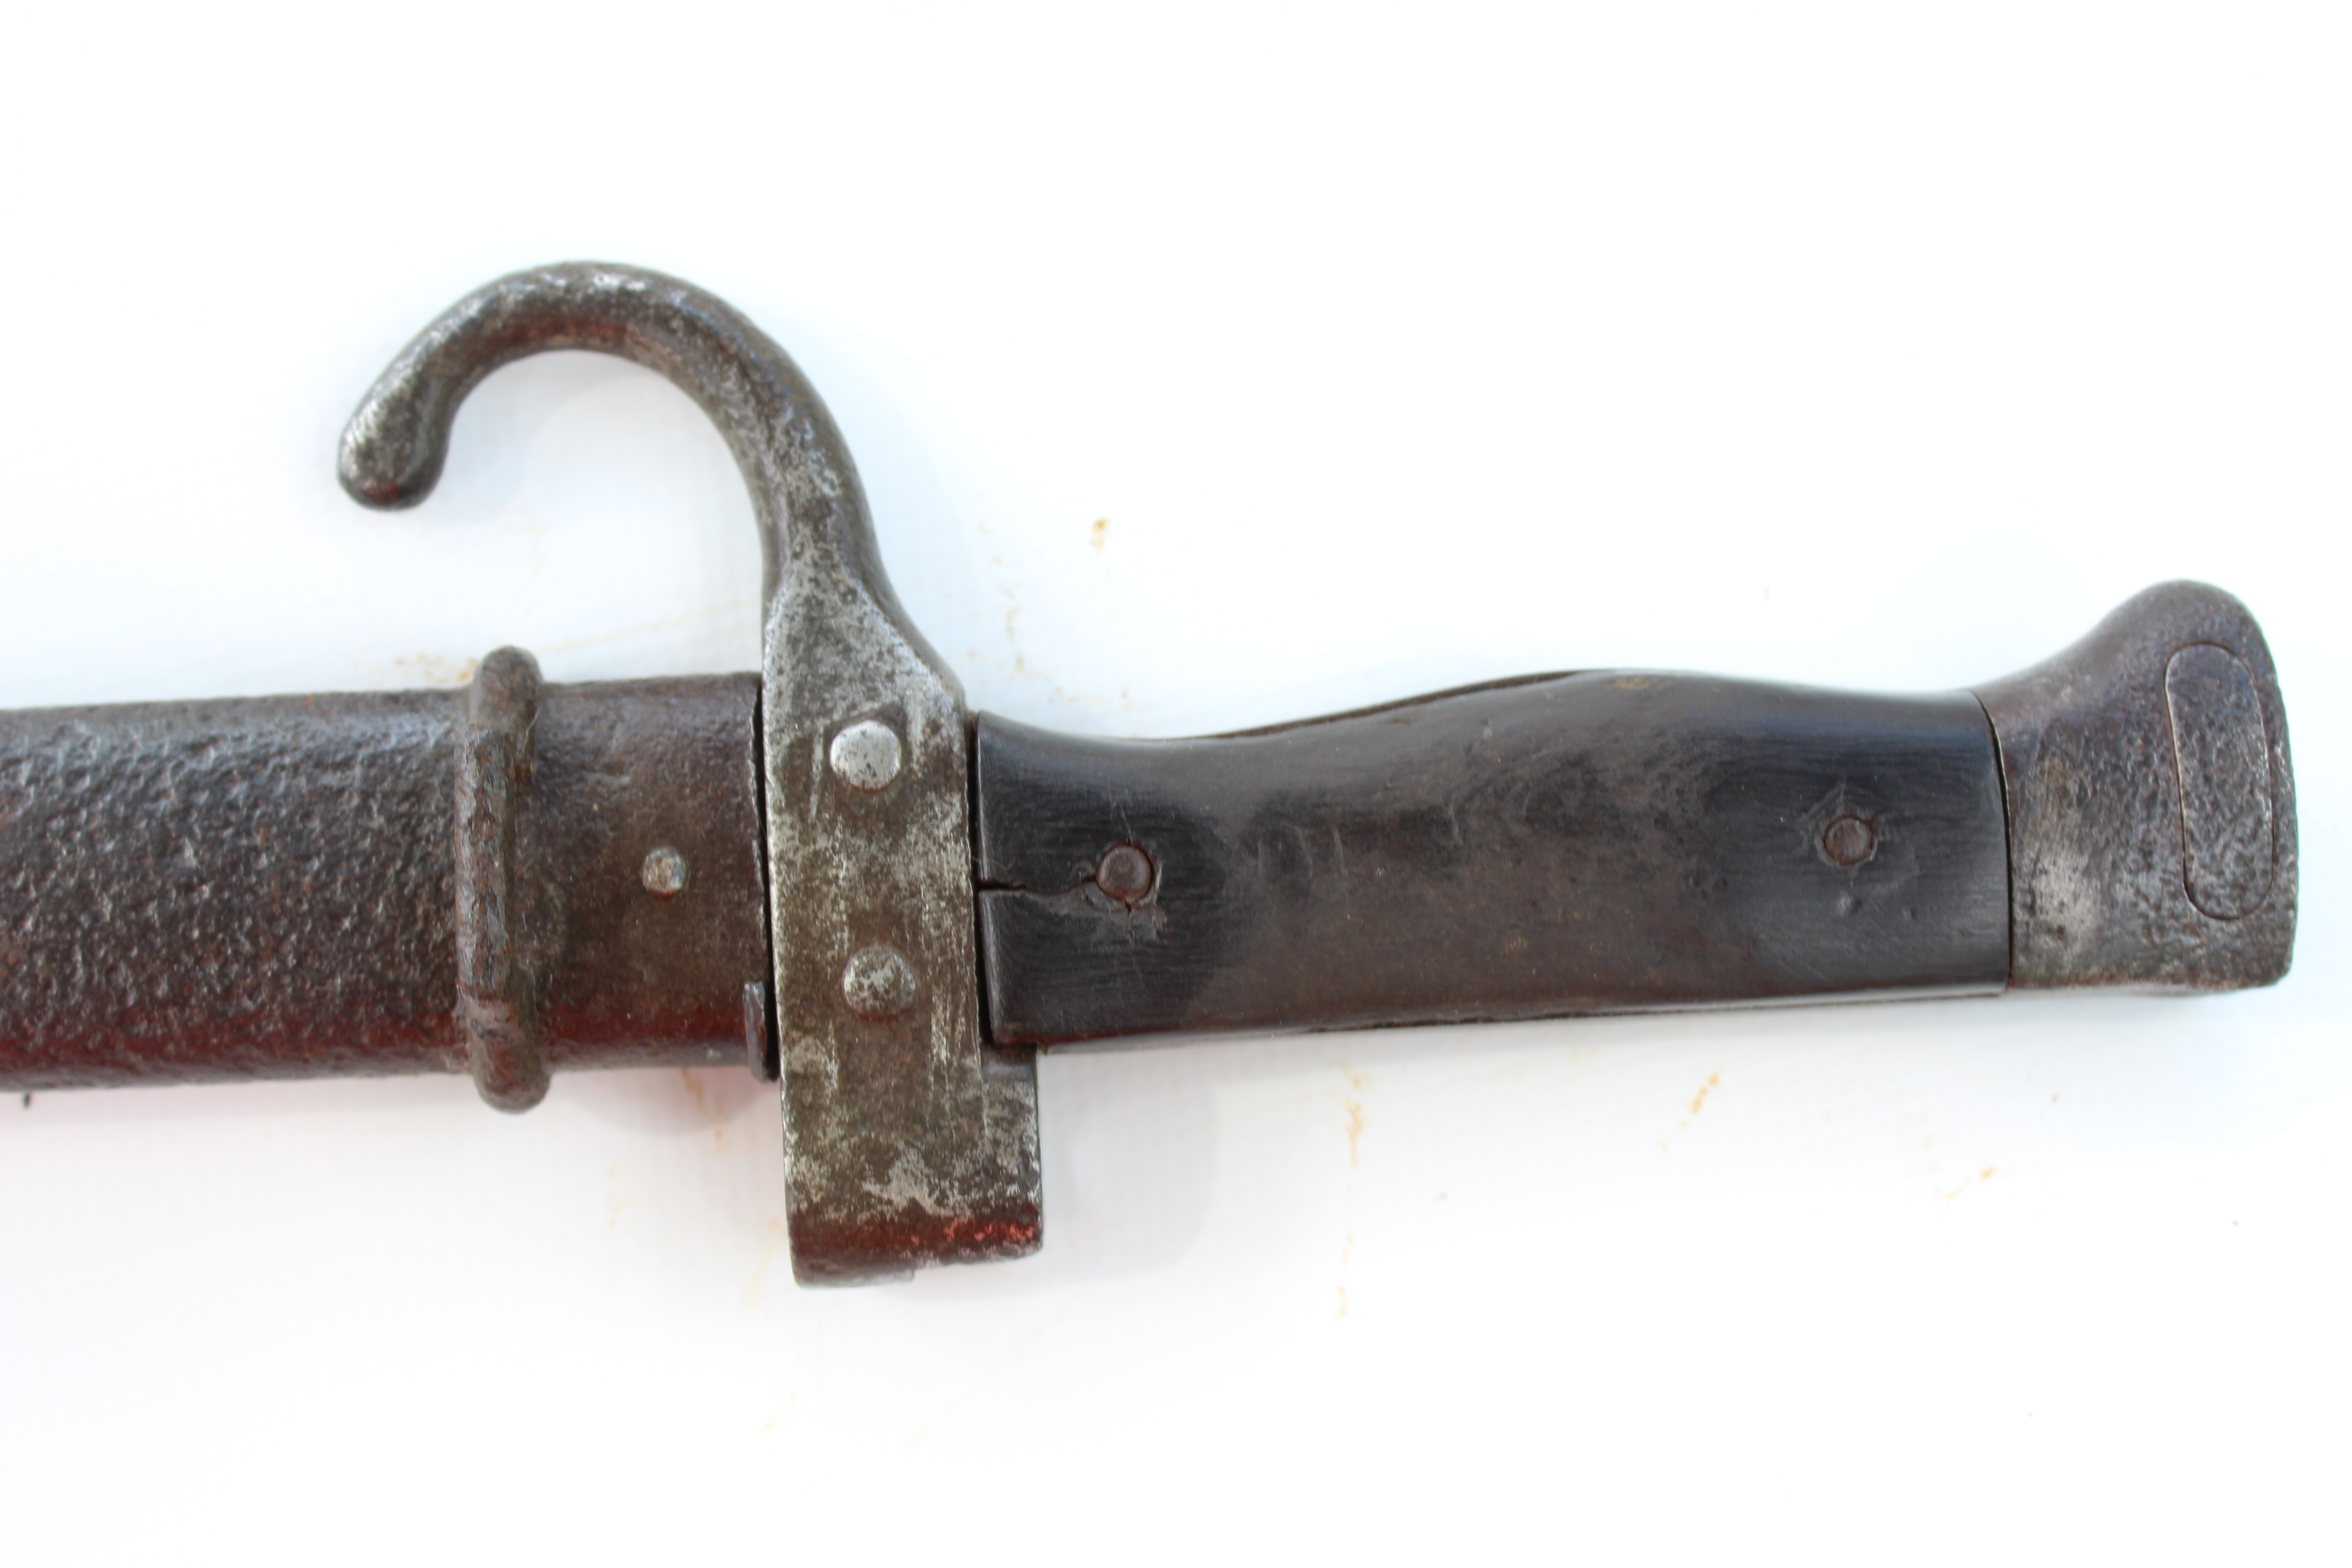 Original French Berthier bayonet model from 1892, signs of wear and pitted  with